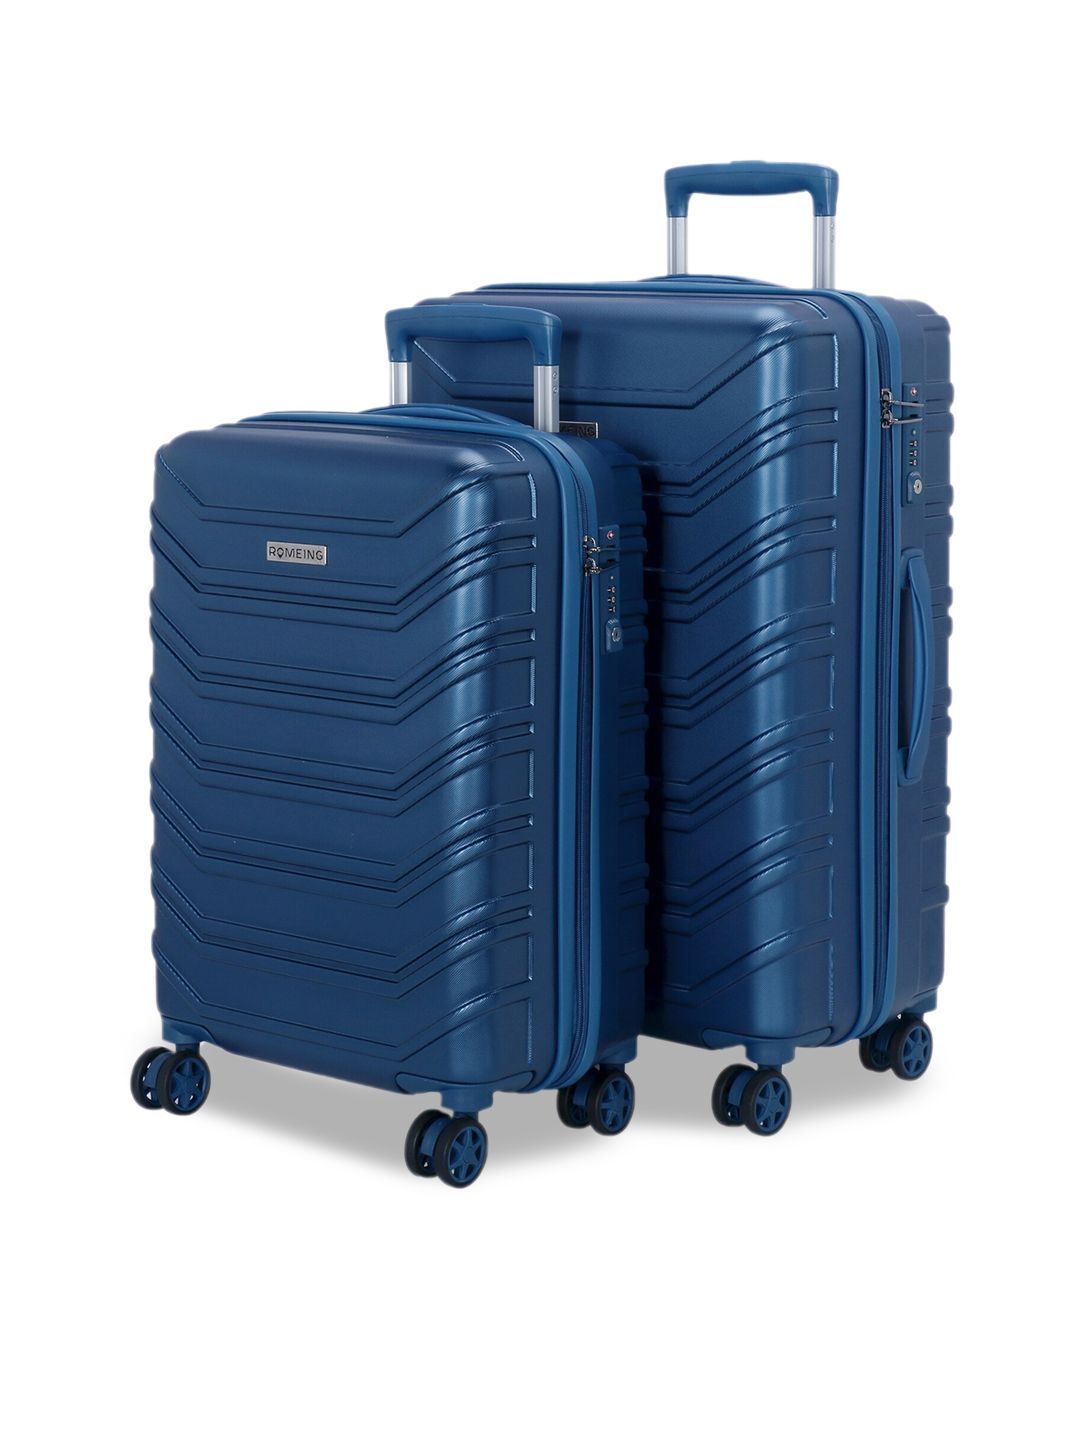 ROMEING Monopoli Set Of 2 Navy Blue Textured Hard-Sided Polycarbonate Trolley Suitcases Price in India